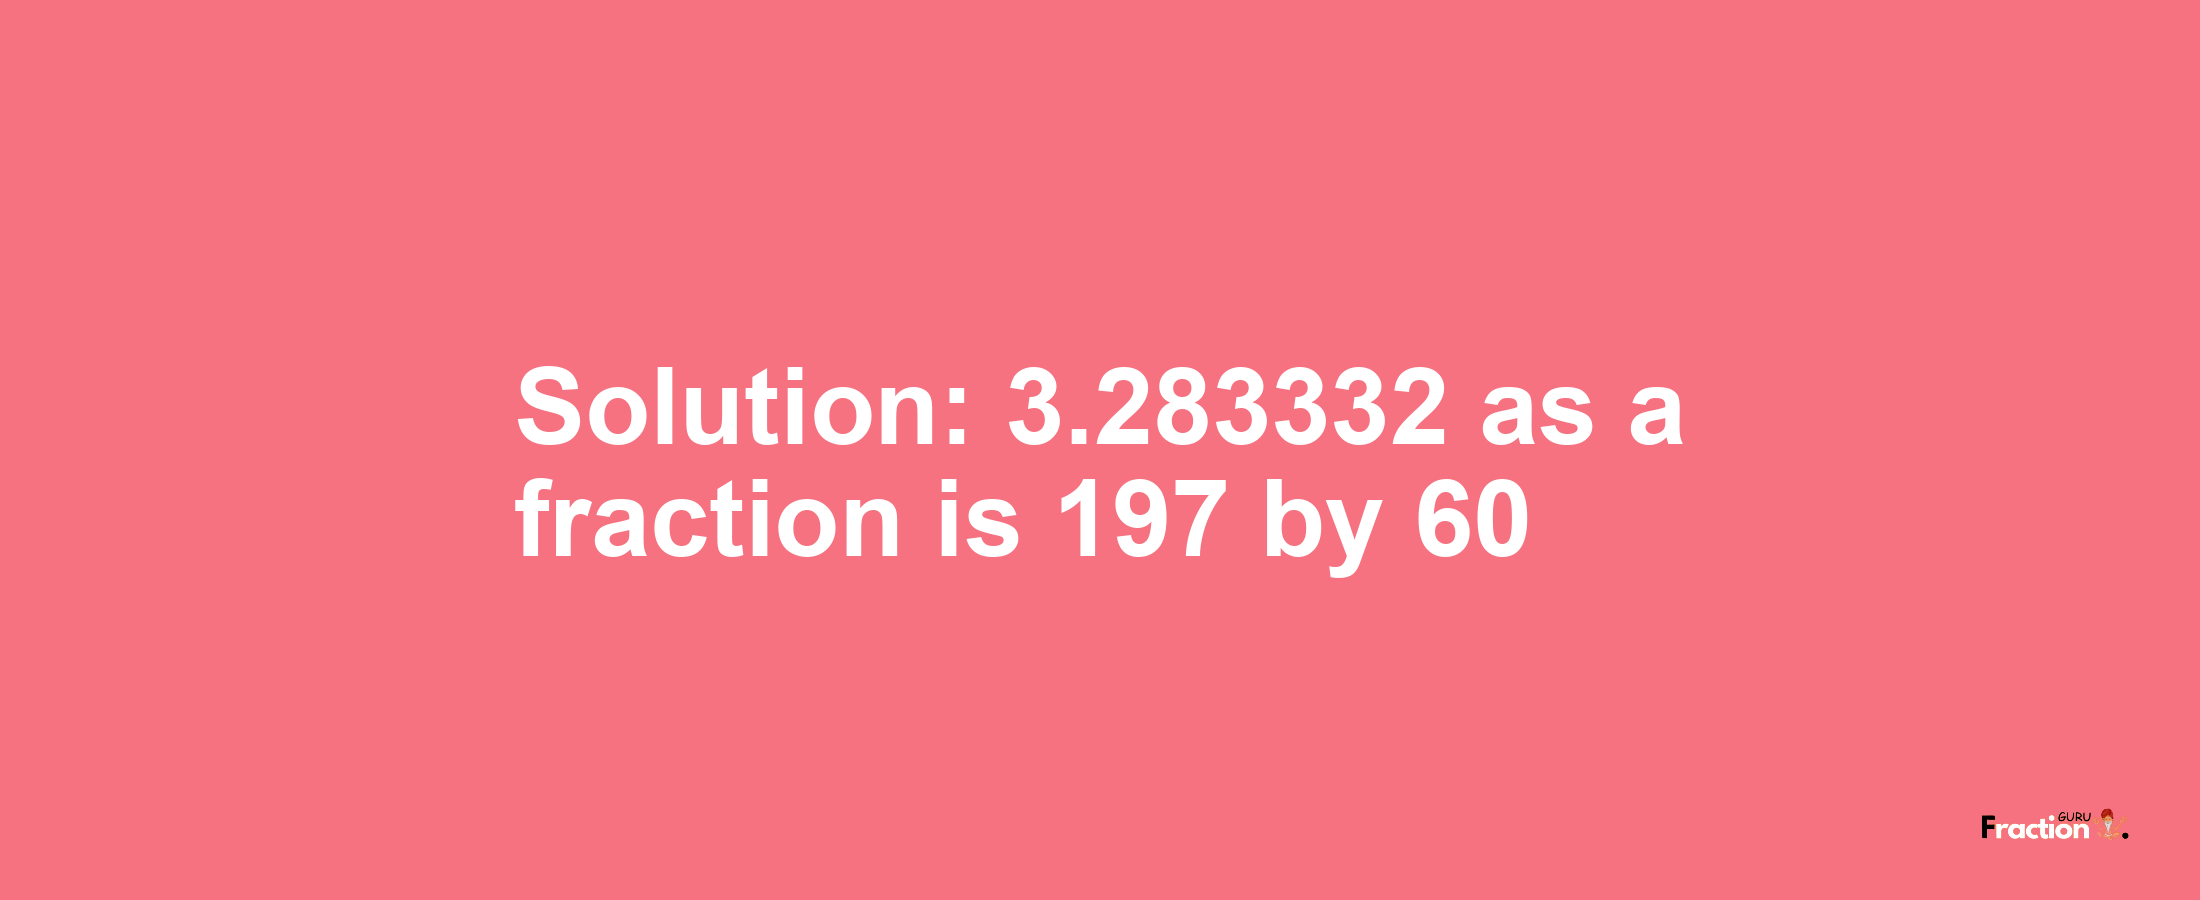 Solution:3.283332 as a fraction is 197/60